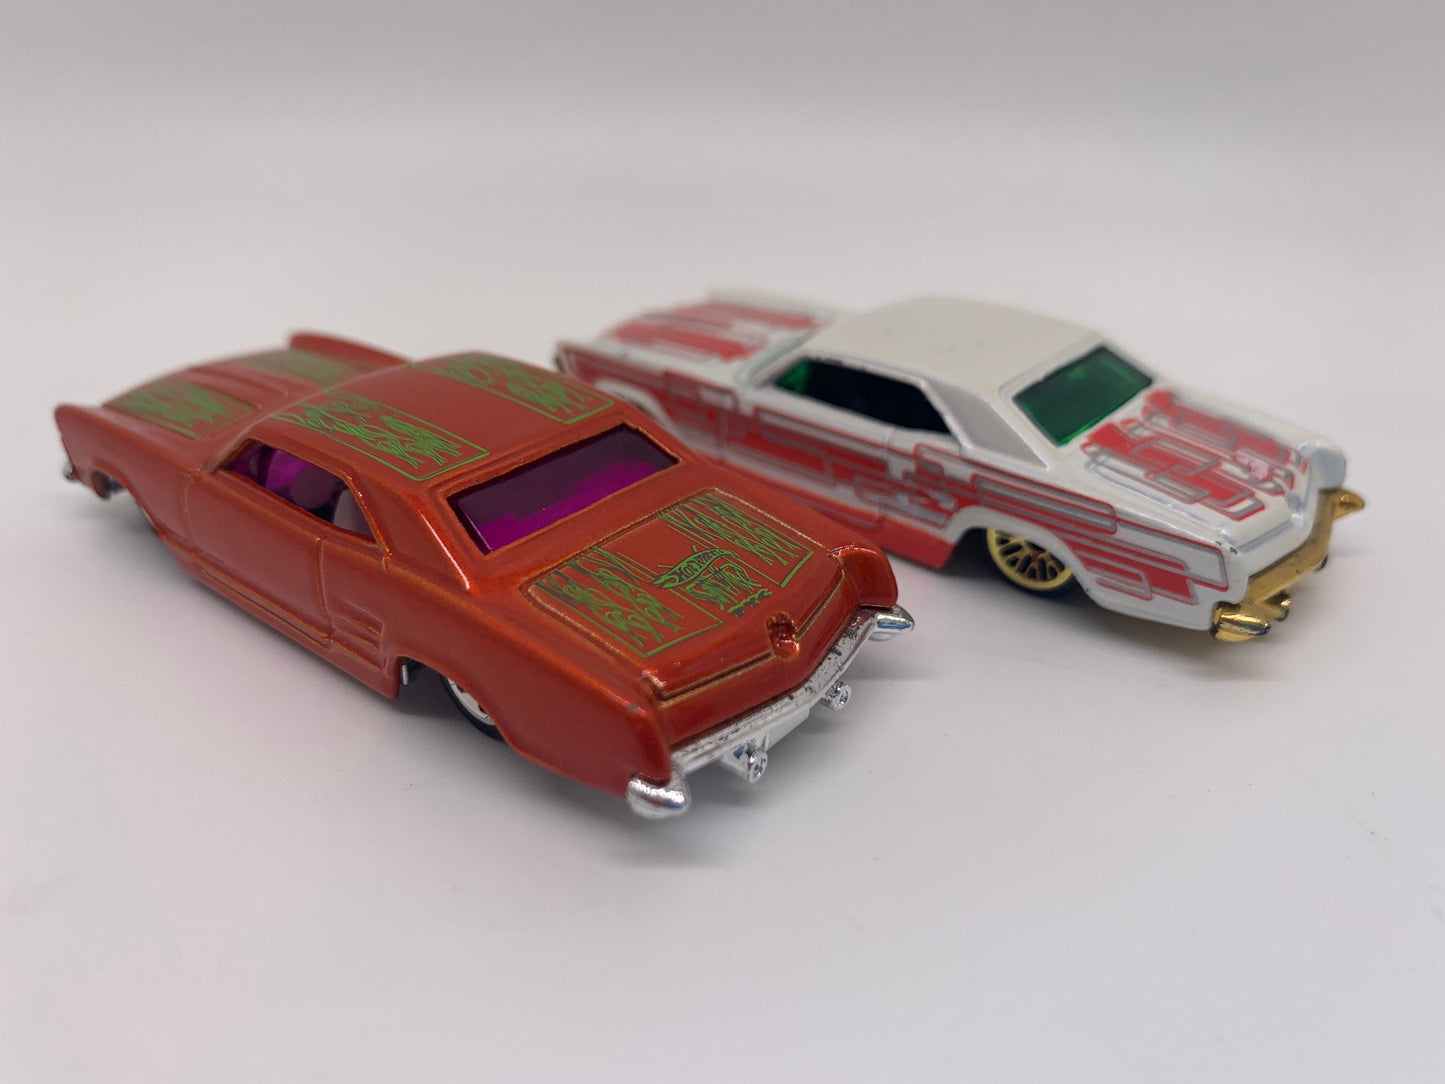 Hot Wheels ’64 Riviera Orange First Editions White Holiday Hot Rods Perfect Birthday Gift Miniature Collectible Scale Model Toy Car